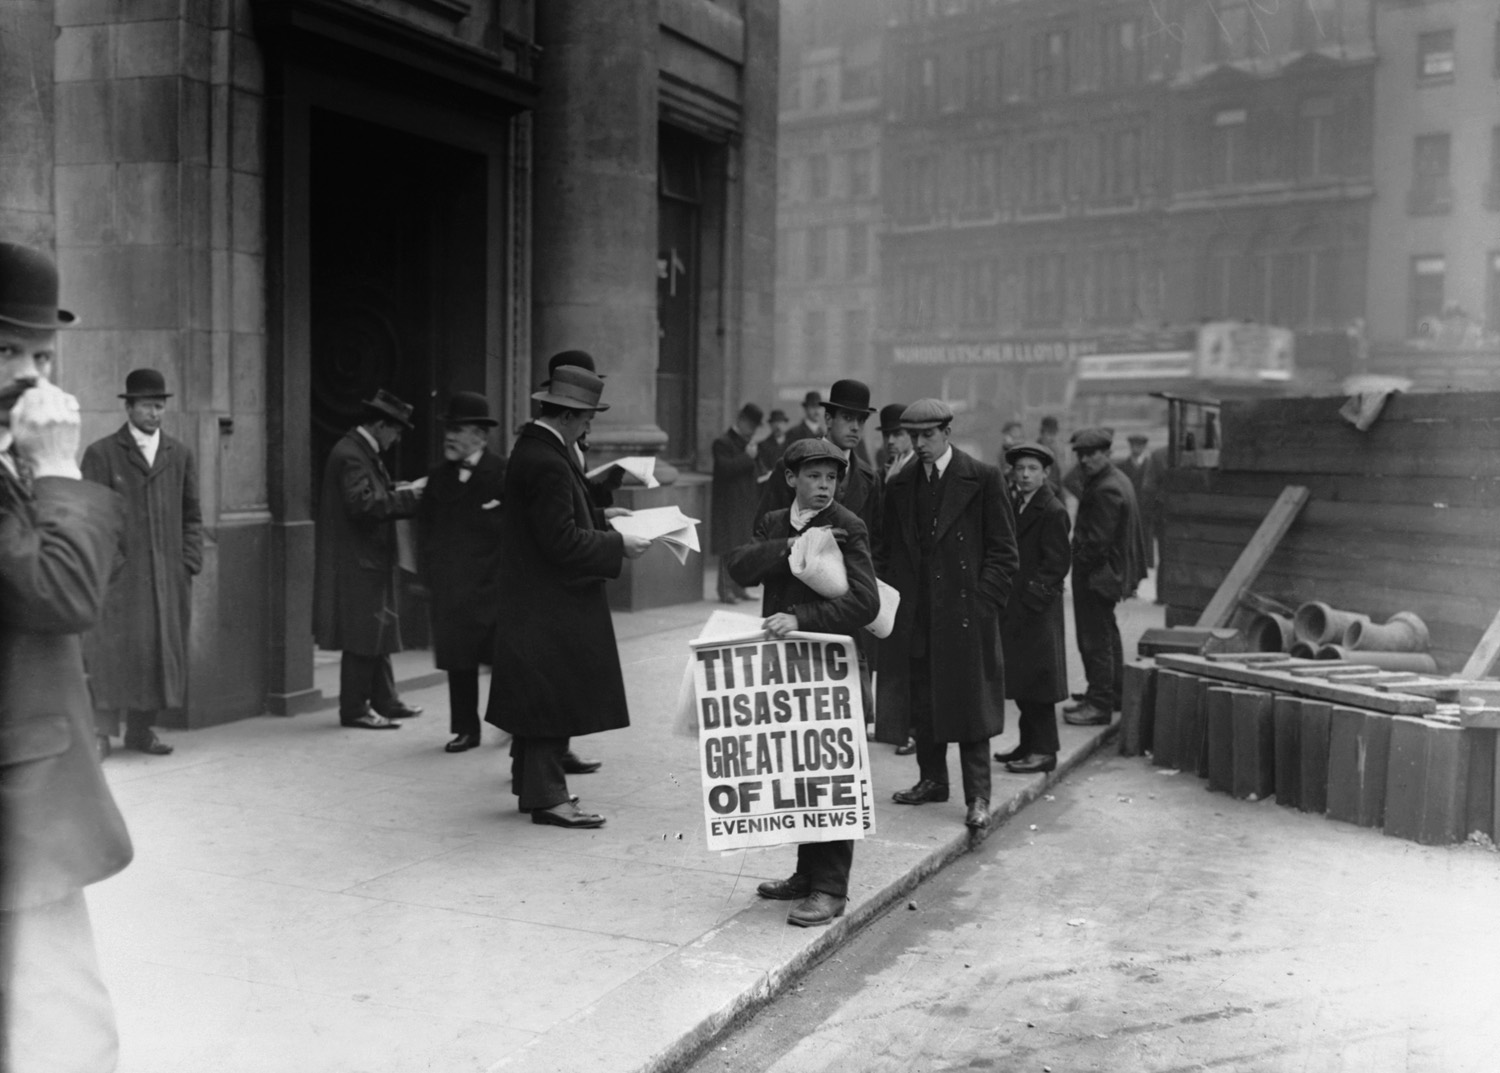 News of the Titanic disaster spreads in London on the day the ship went down, April 15, 1912.